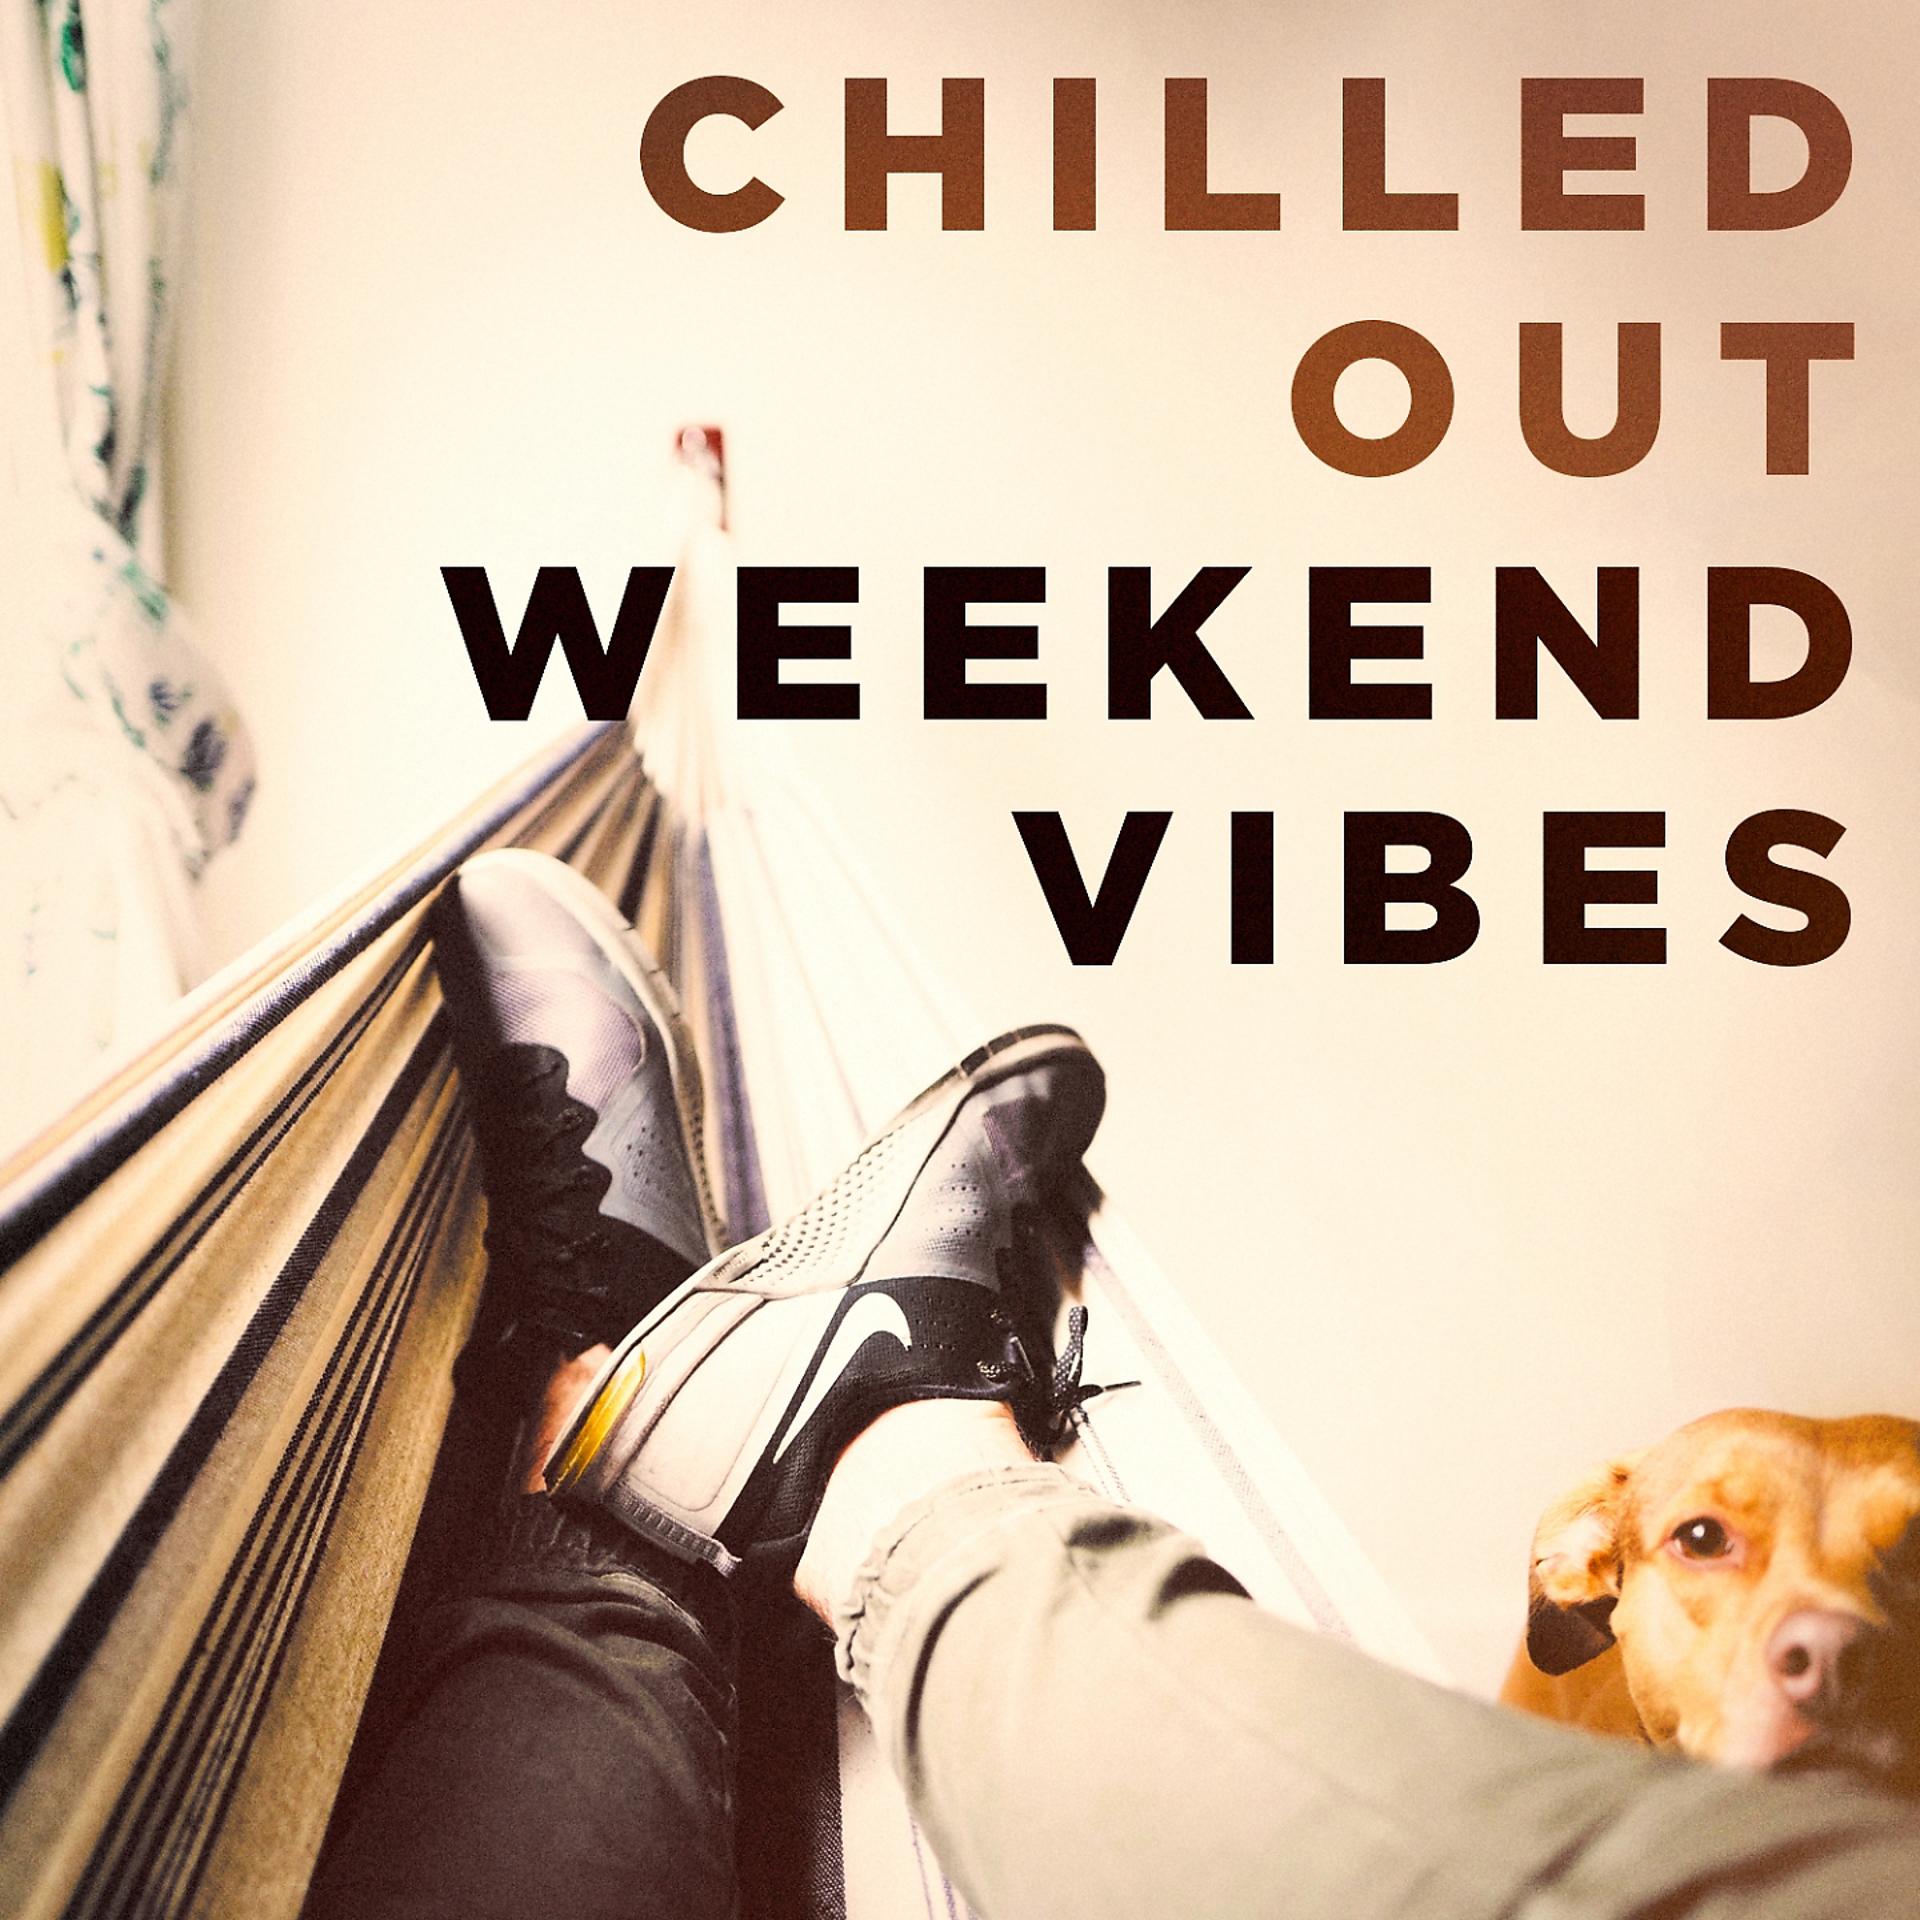 Weekend vibes. Weekend Vibe Jubël. Weekend Chill. Chilled out. Polpur Vibe weekend.